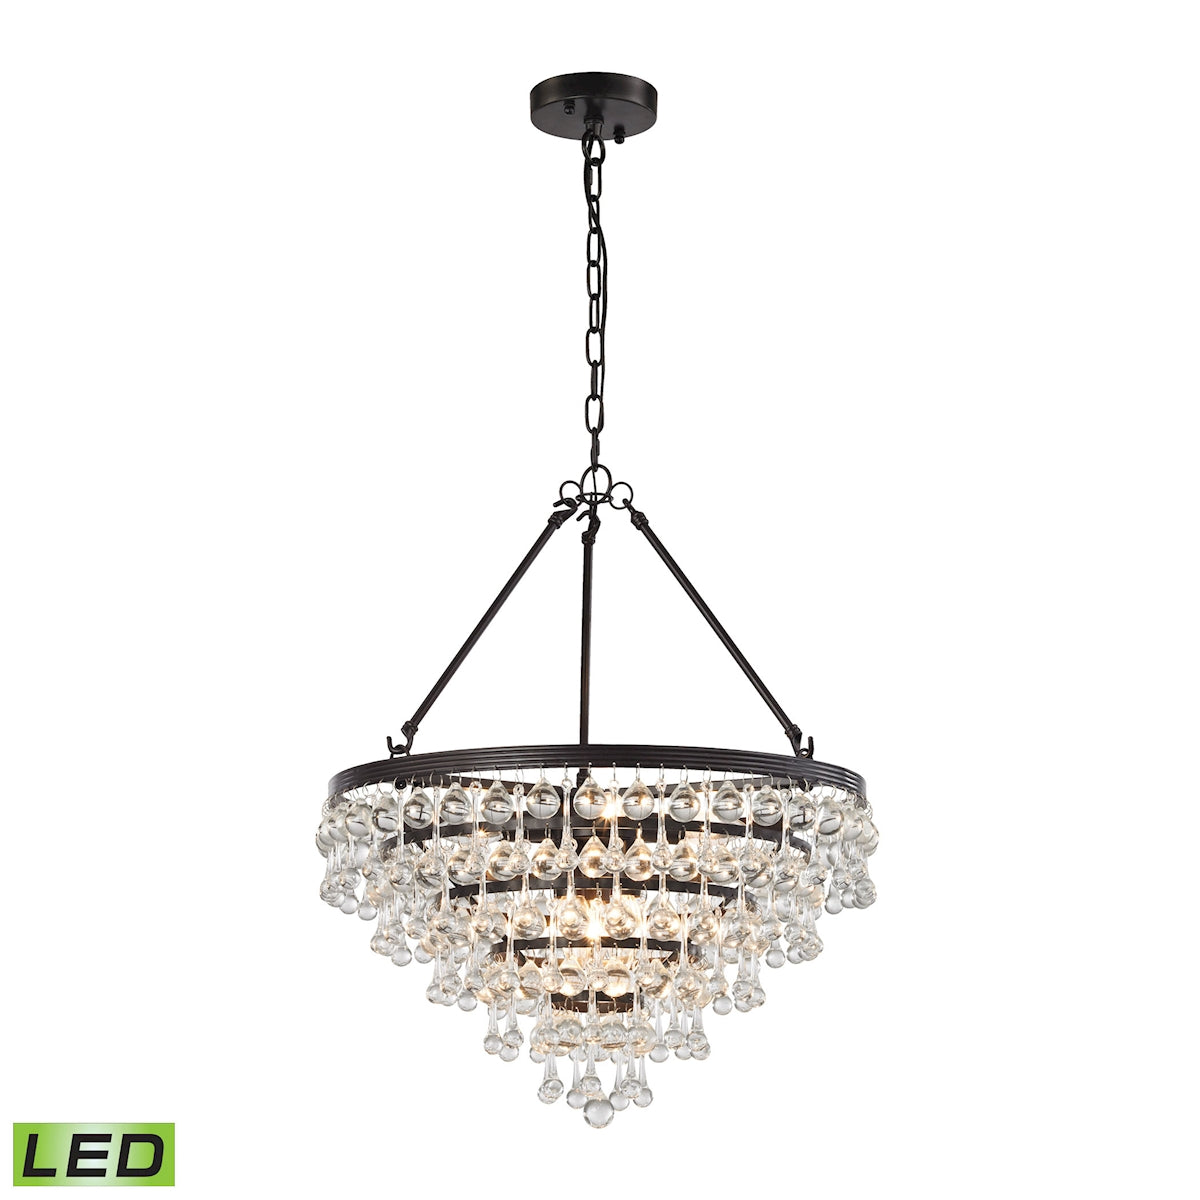 ELK Lighting 31271/6-LED Ramira 6-Light Chandelier in Oil Rubbed Bronze with Clear Glass Drops - Includes LED Bulbs